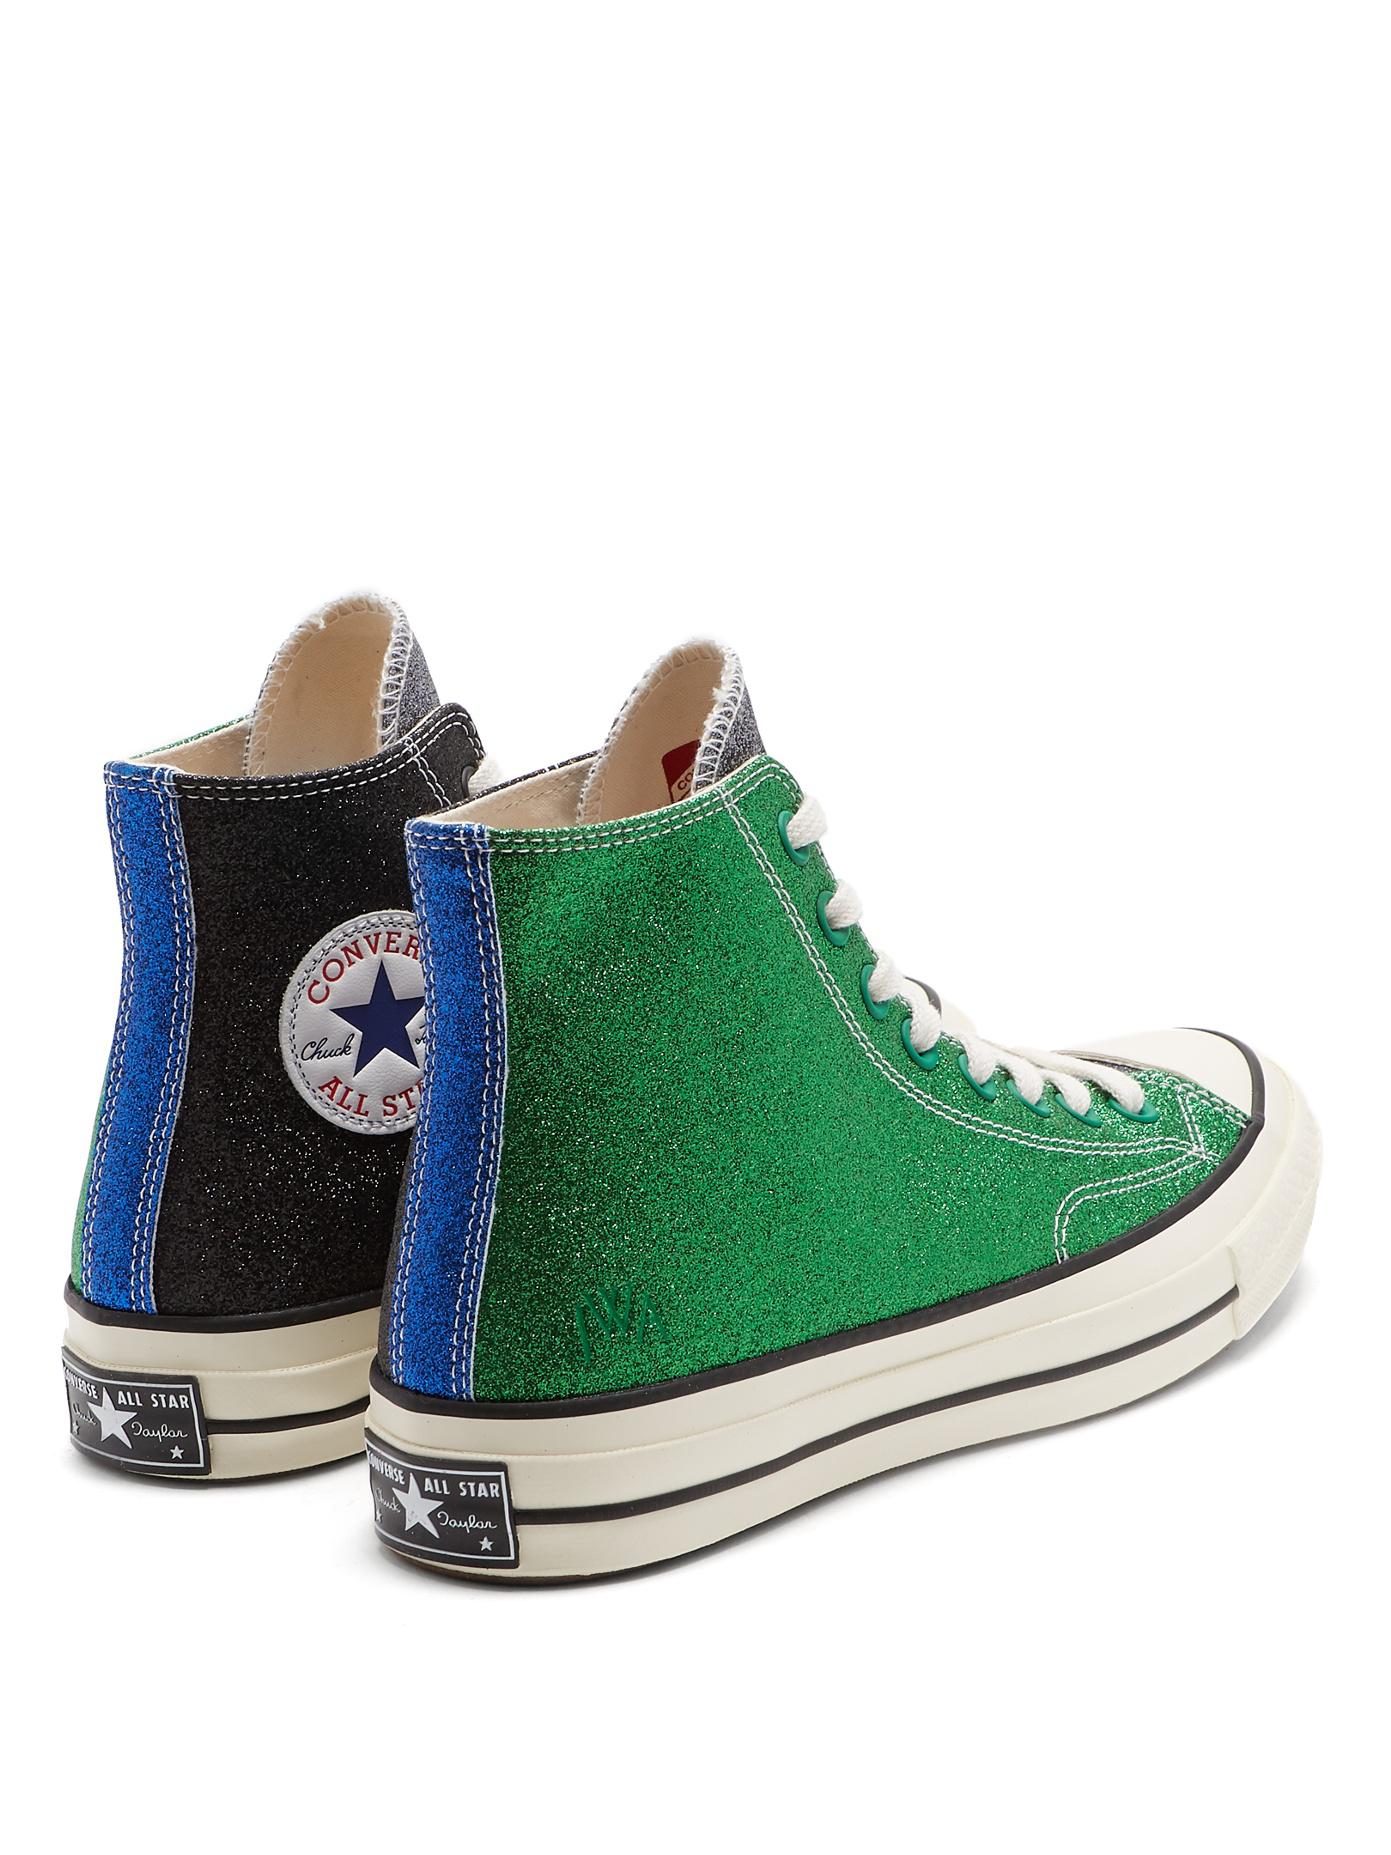 Converse Leather Glitter High-top Trainers in Black Green (Green) | Lyst